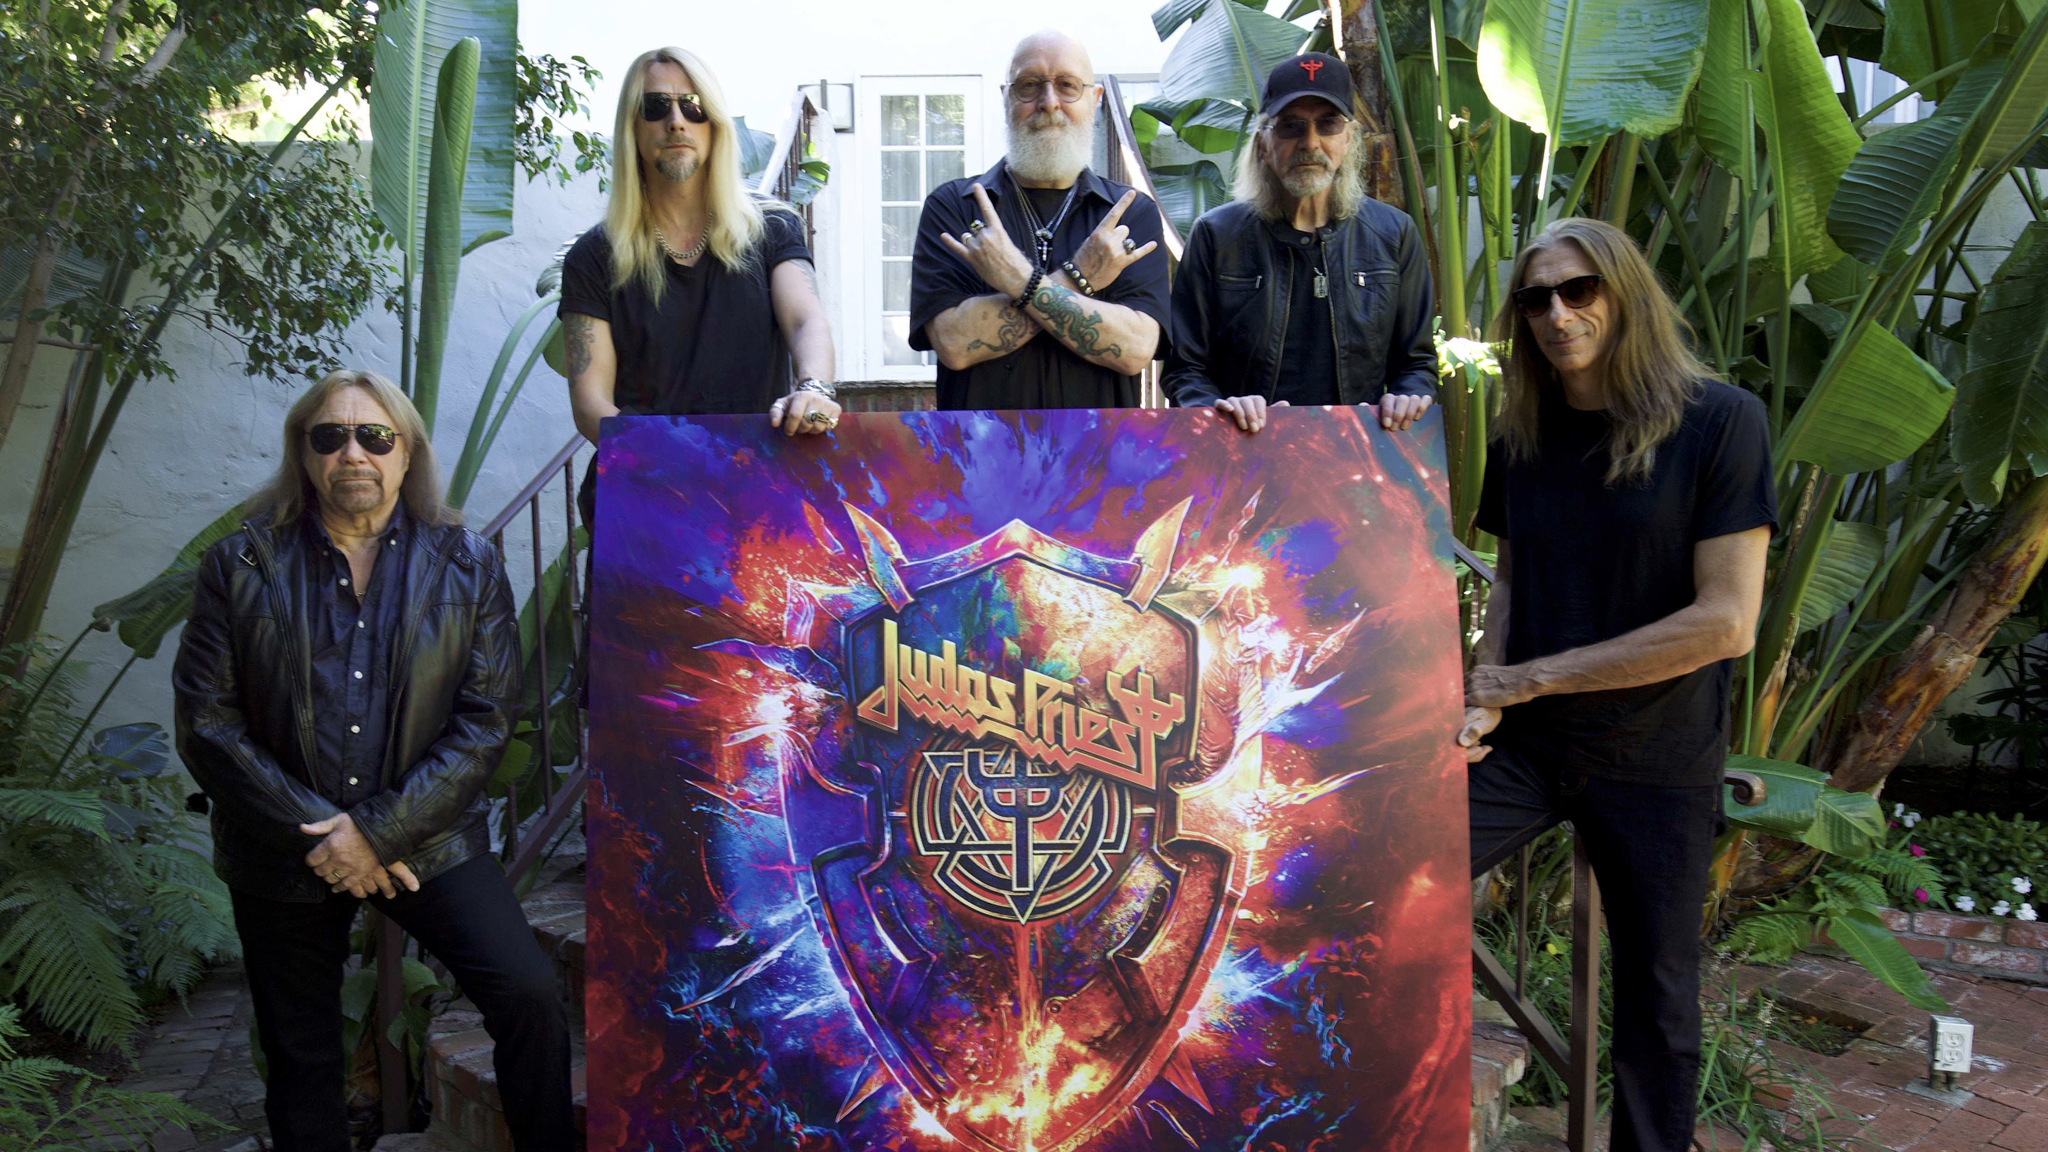 Defenders of the Faith: Judas Priest show the kids how its done on ‘Invincible Shield’